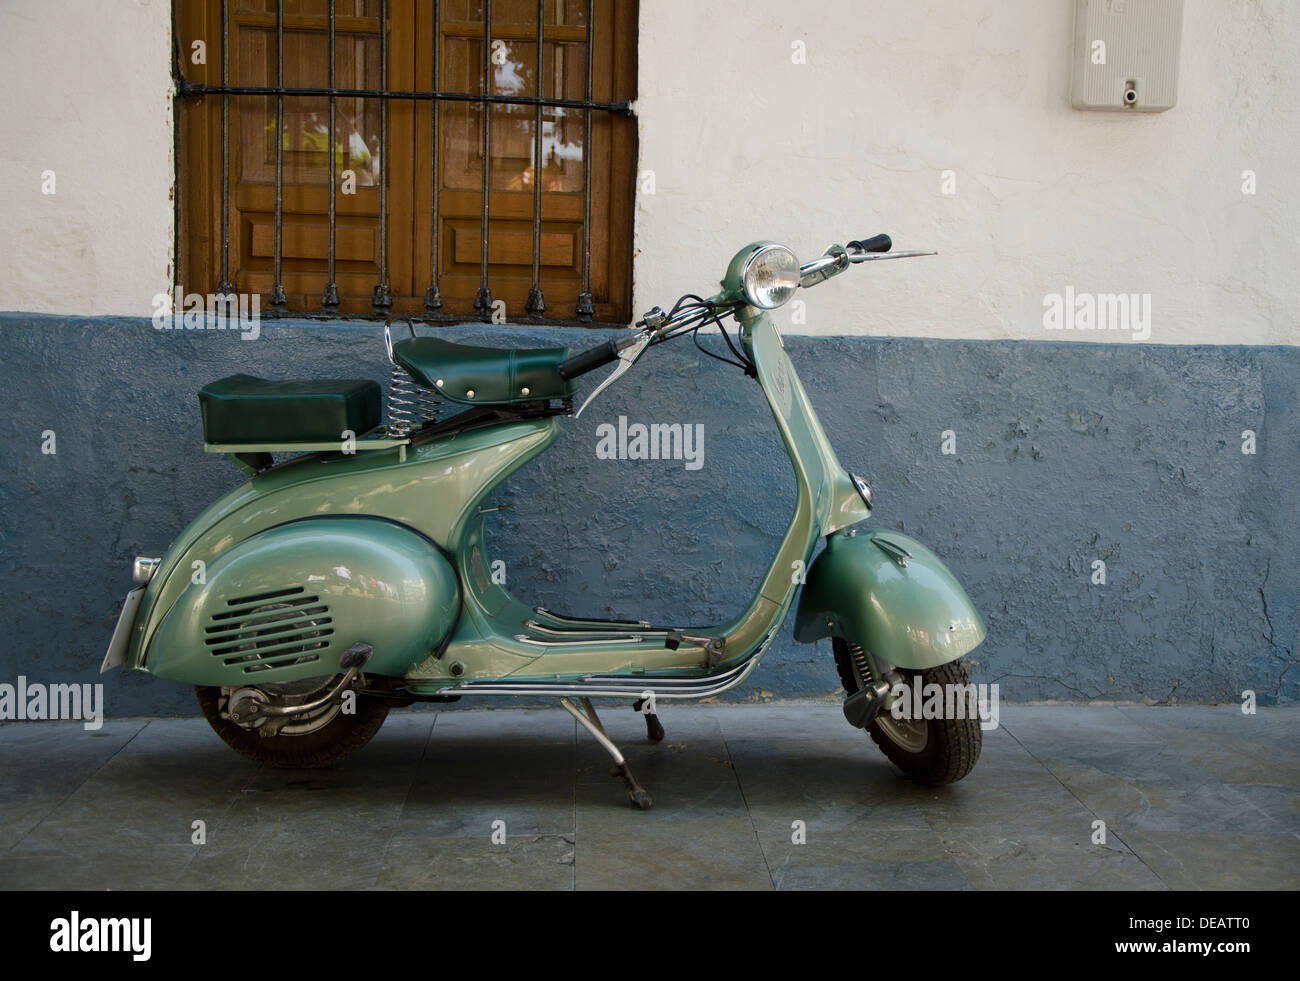 Vespa Piaggio 150 classic scooter 1962 parked in a street in Coin  Andalusia, Spain Stock Photo - Alamy